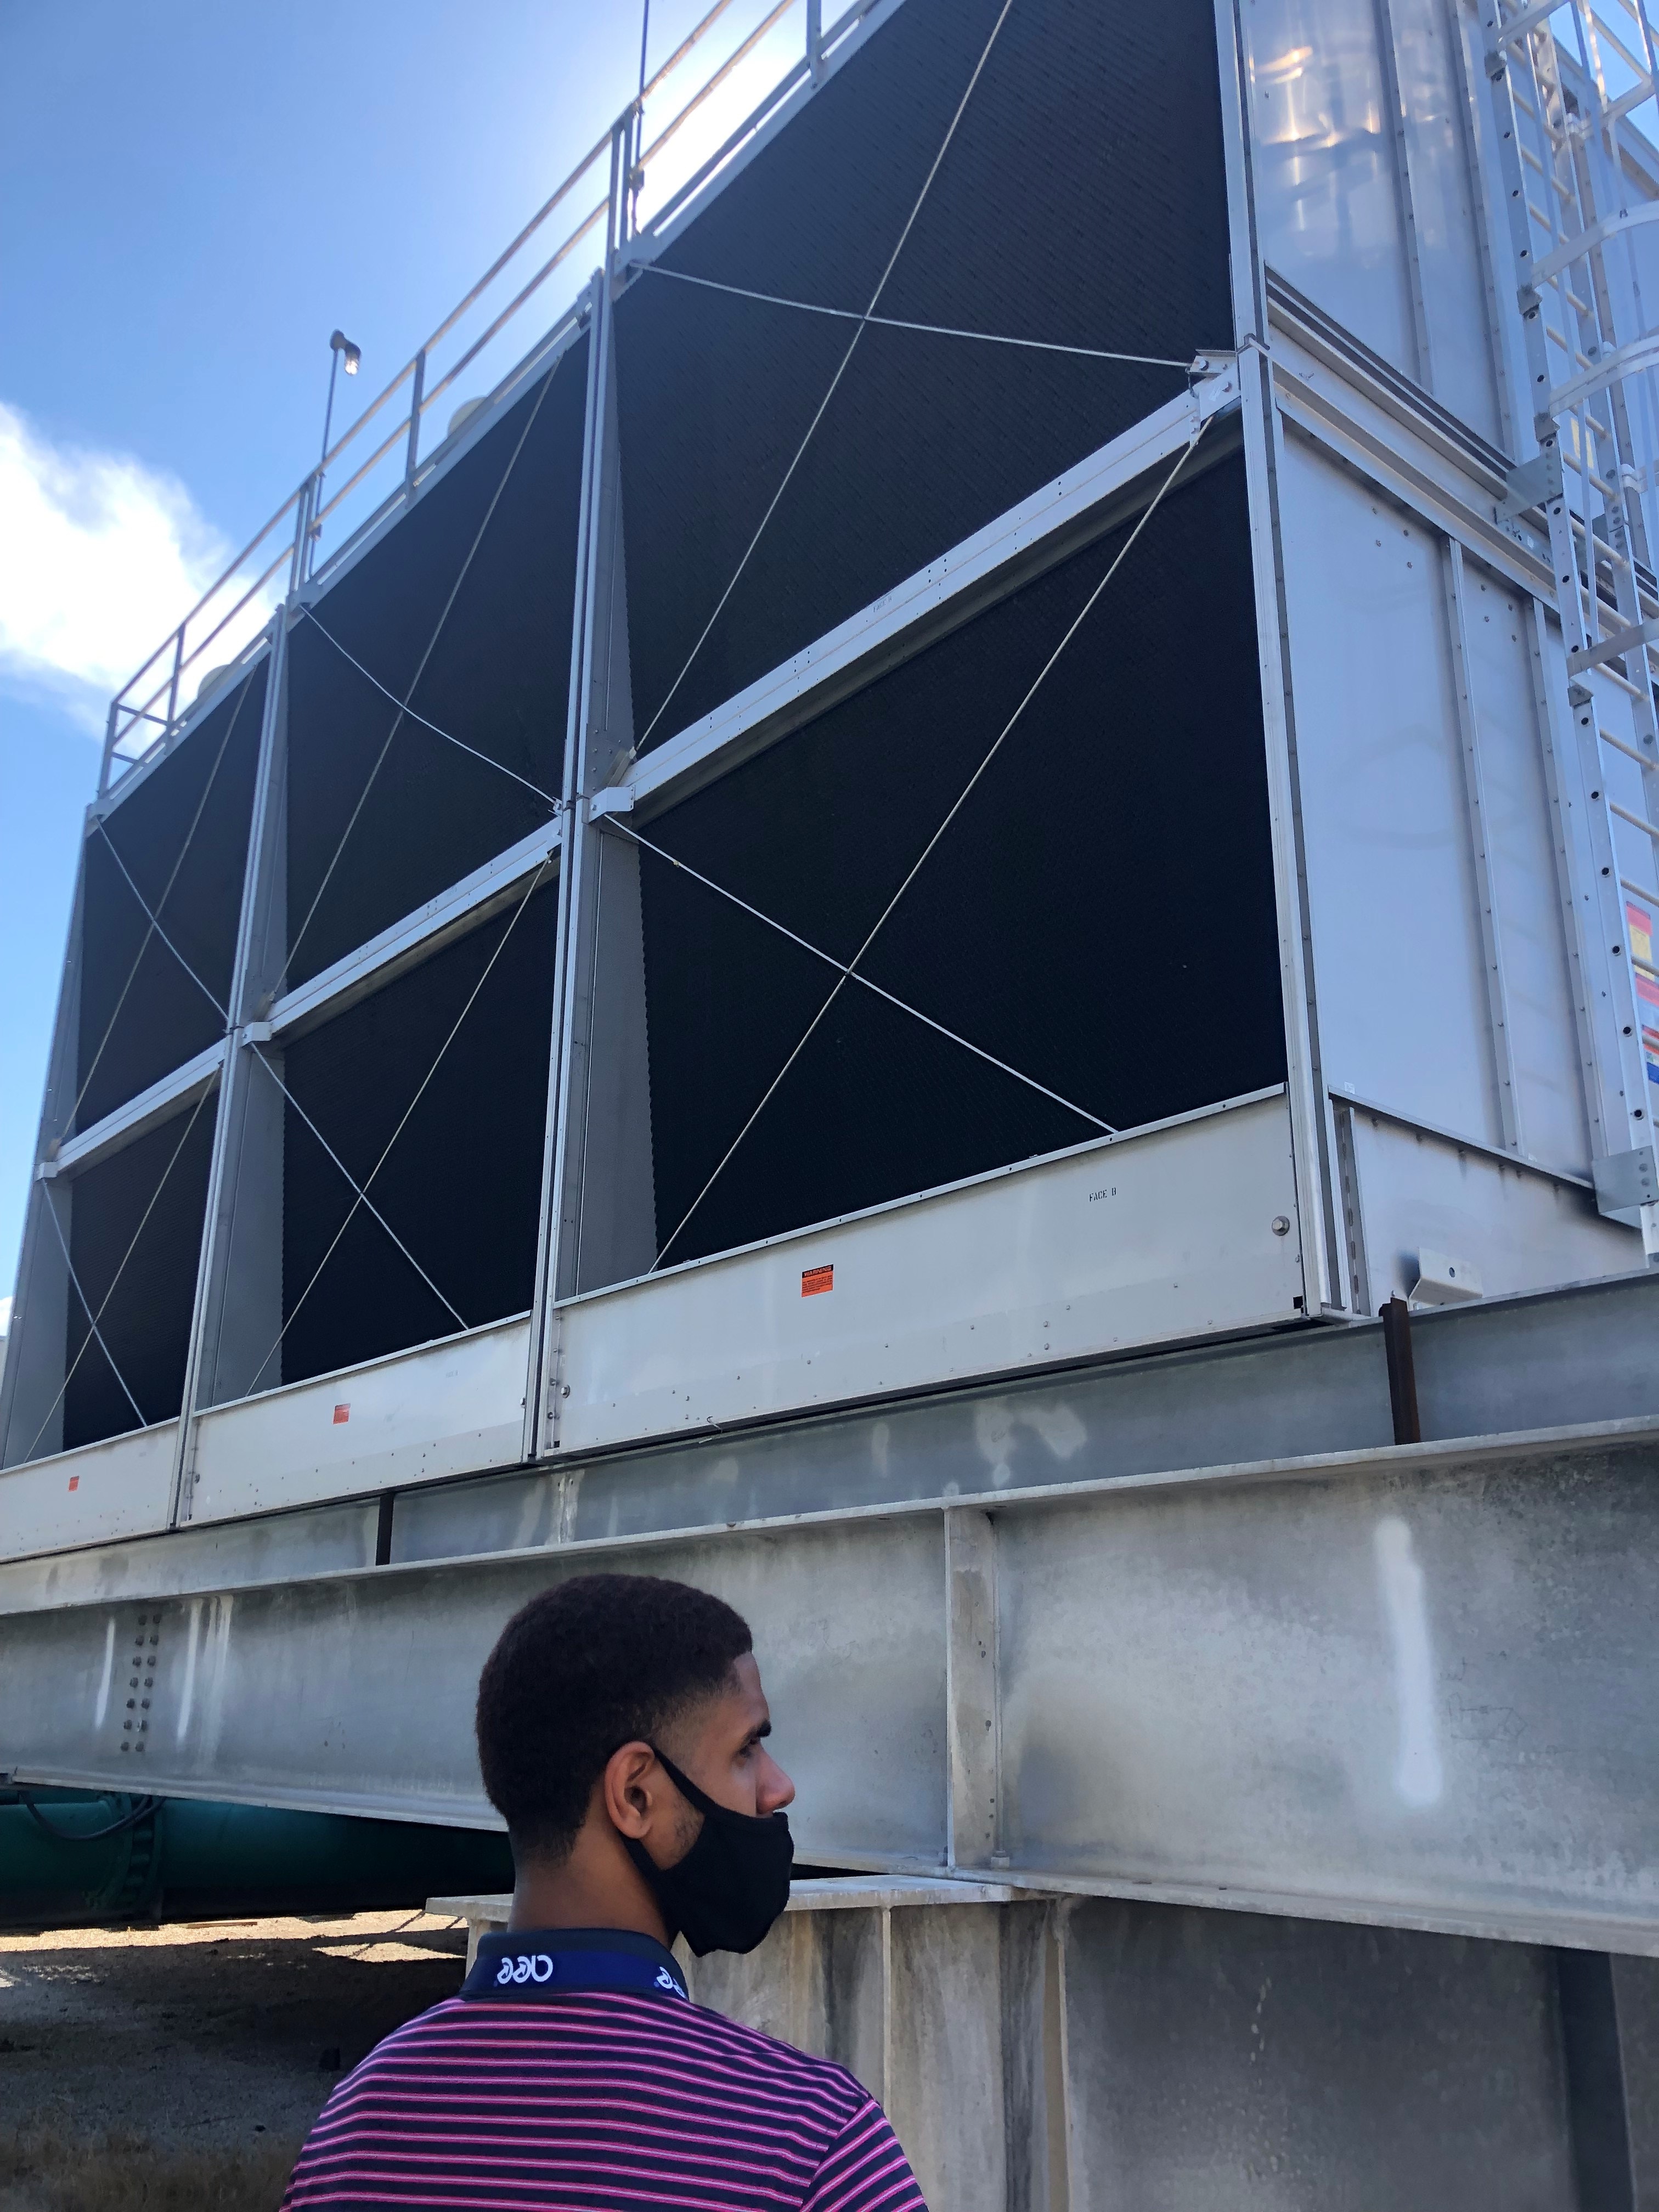 Quick cooling tower tour at the Ernest N. Morial Convention Center.